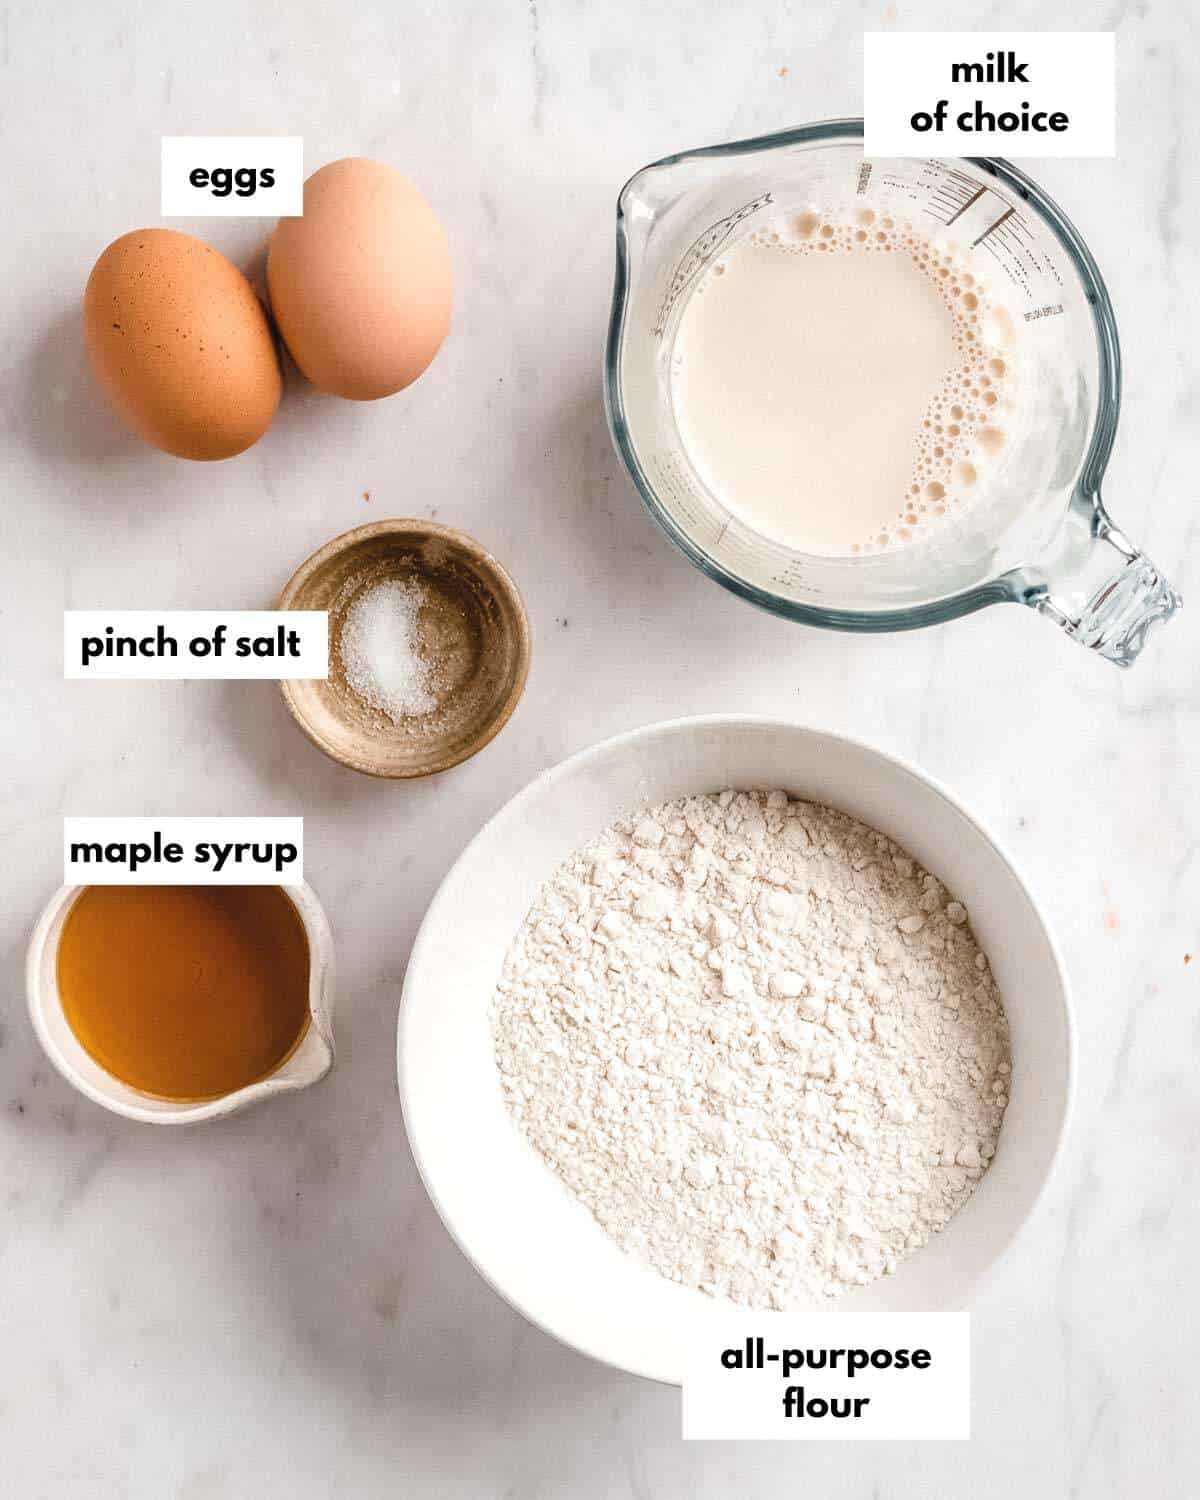 all ingredients needed to make pancakes without baking powder laid out on a table.